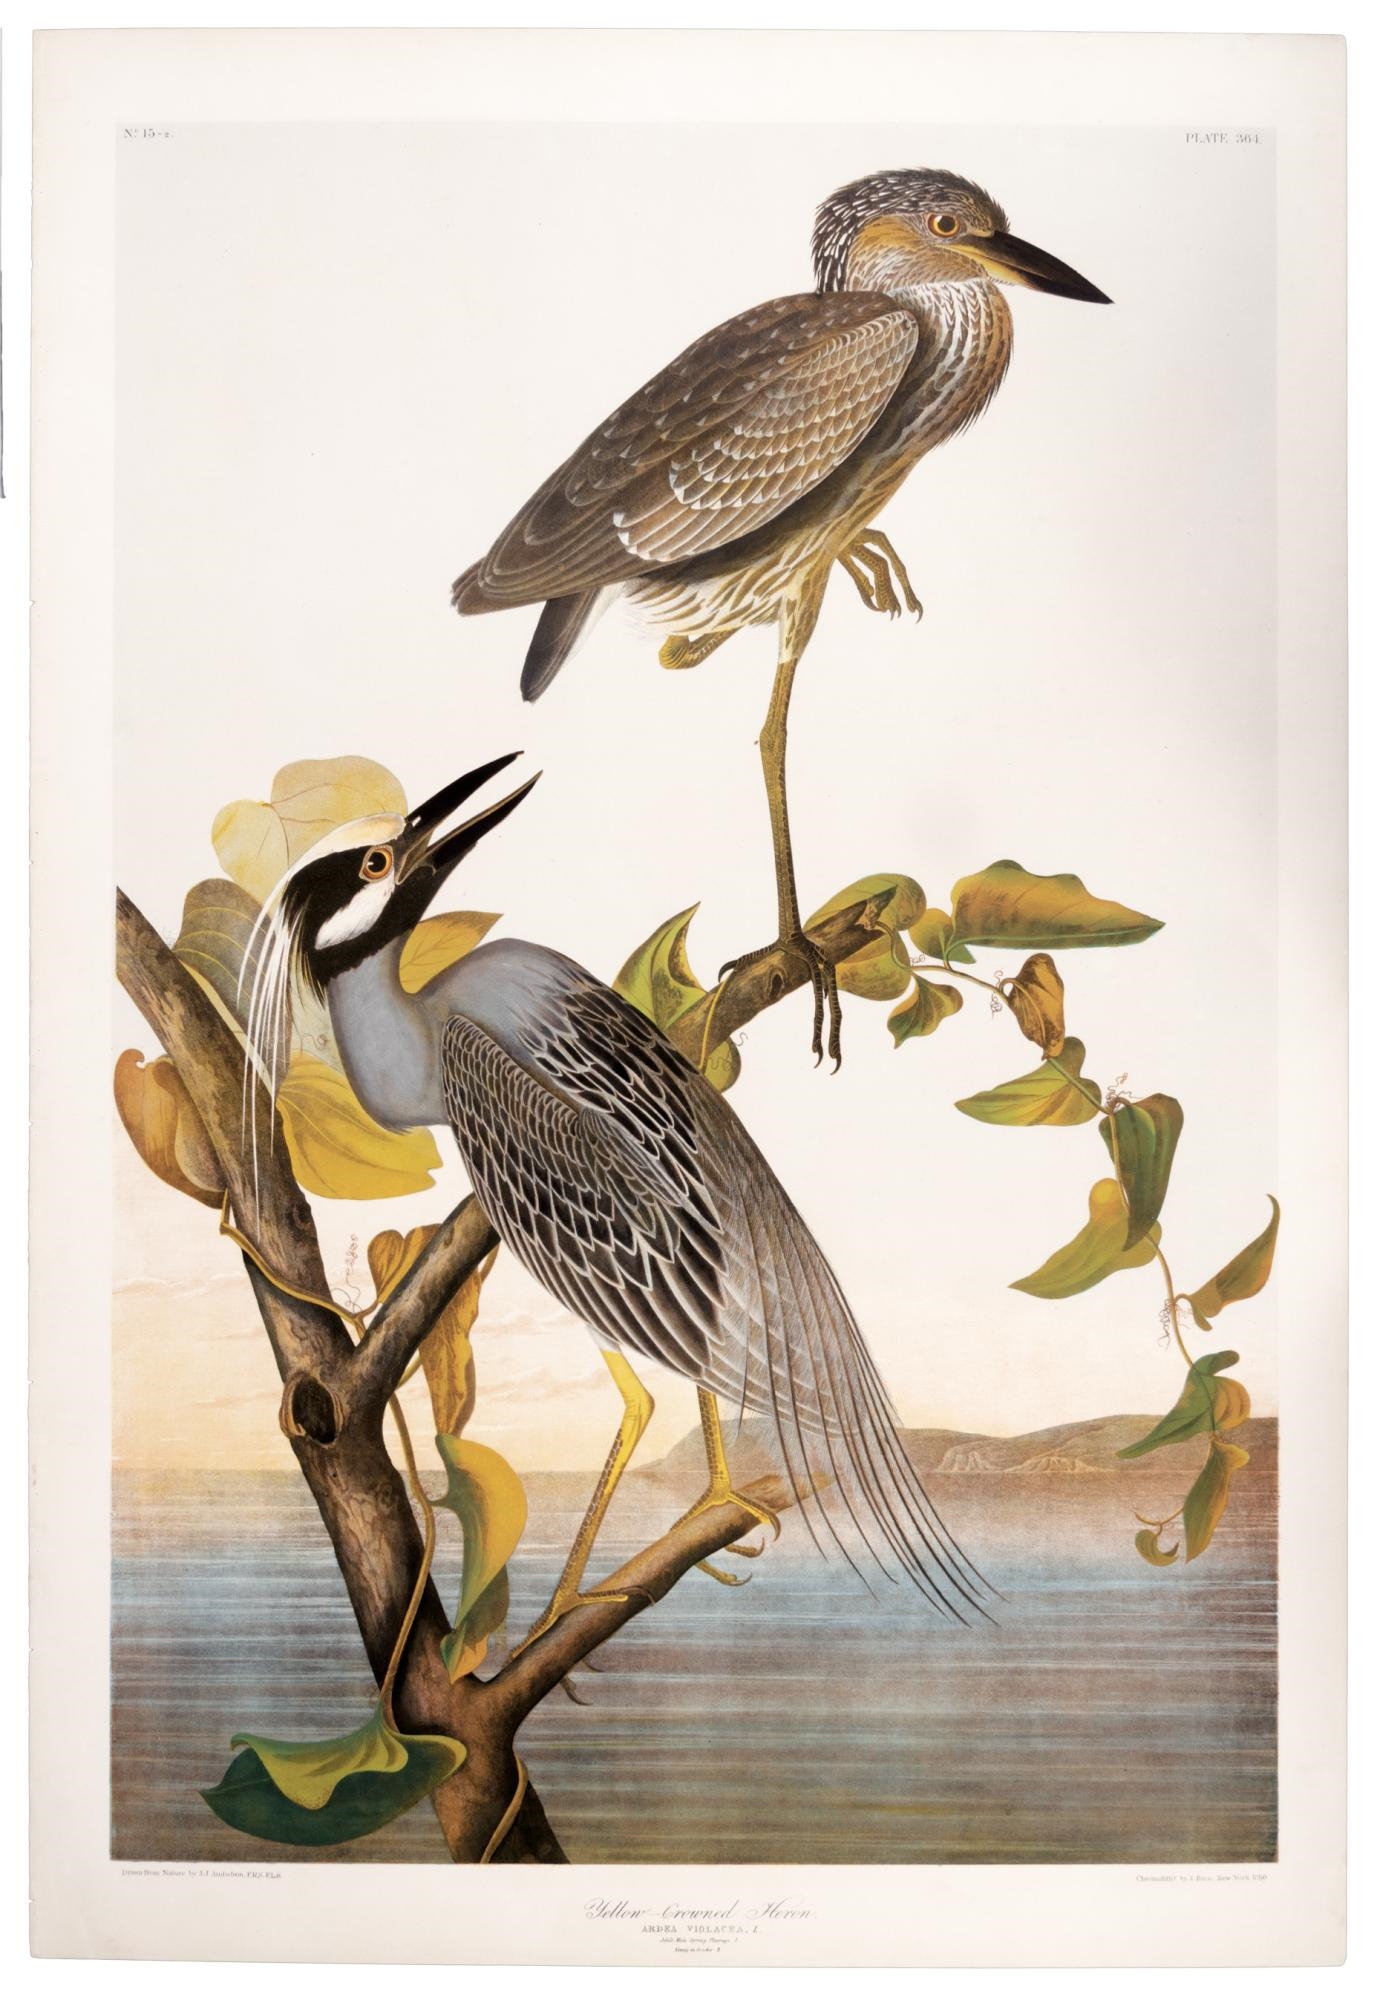 Yellow-Crowned Heron, Ardea Viogacea. L. Adult Male Spring Plumage 1. Youth in October 2. by John James Audubon, 1860